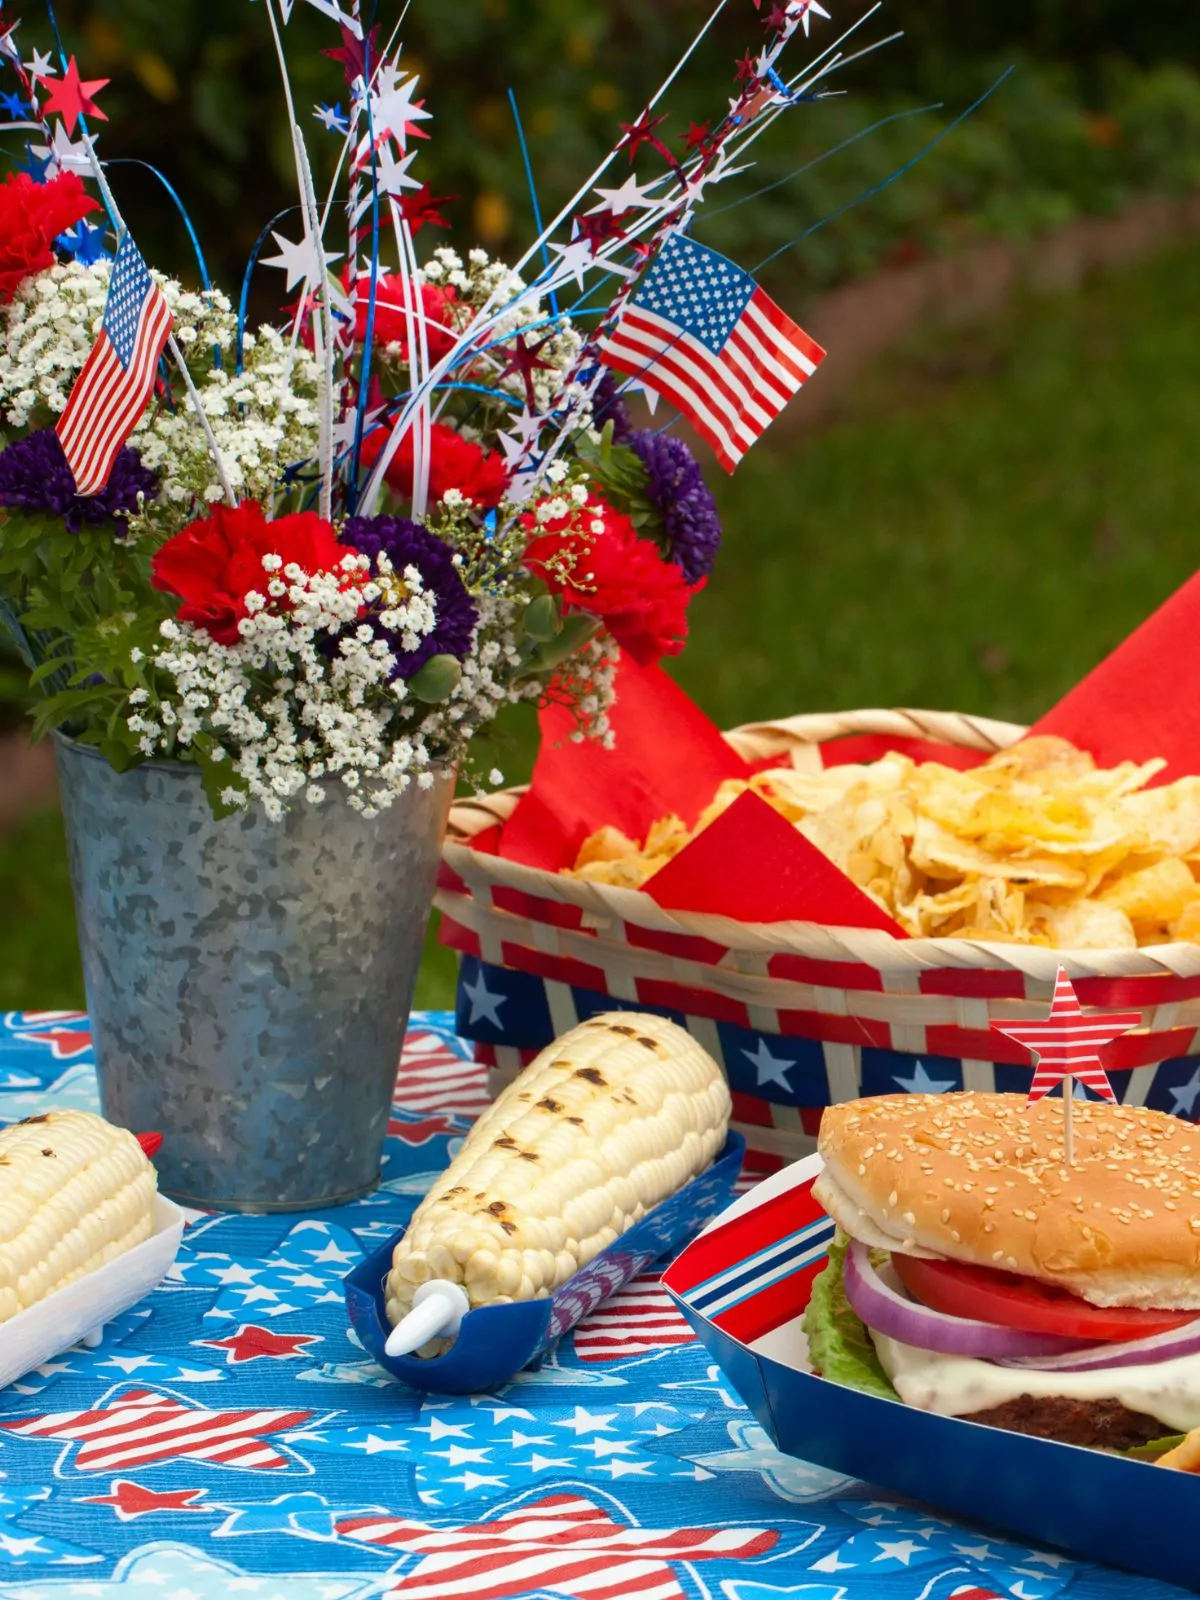 picnic table set with food and a bucket of flowers for patriotic holidays.